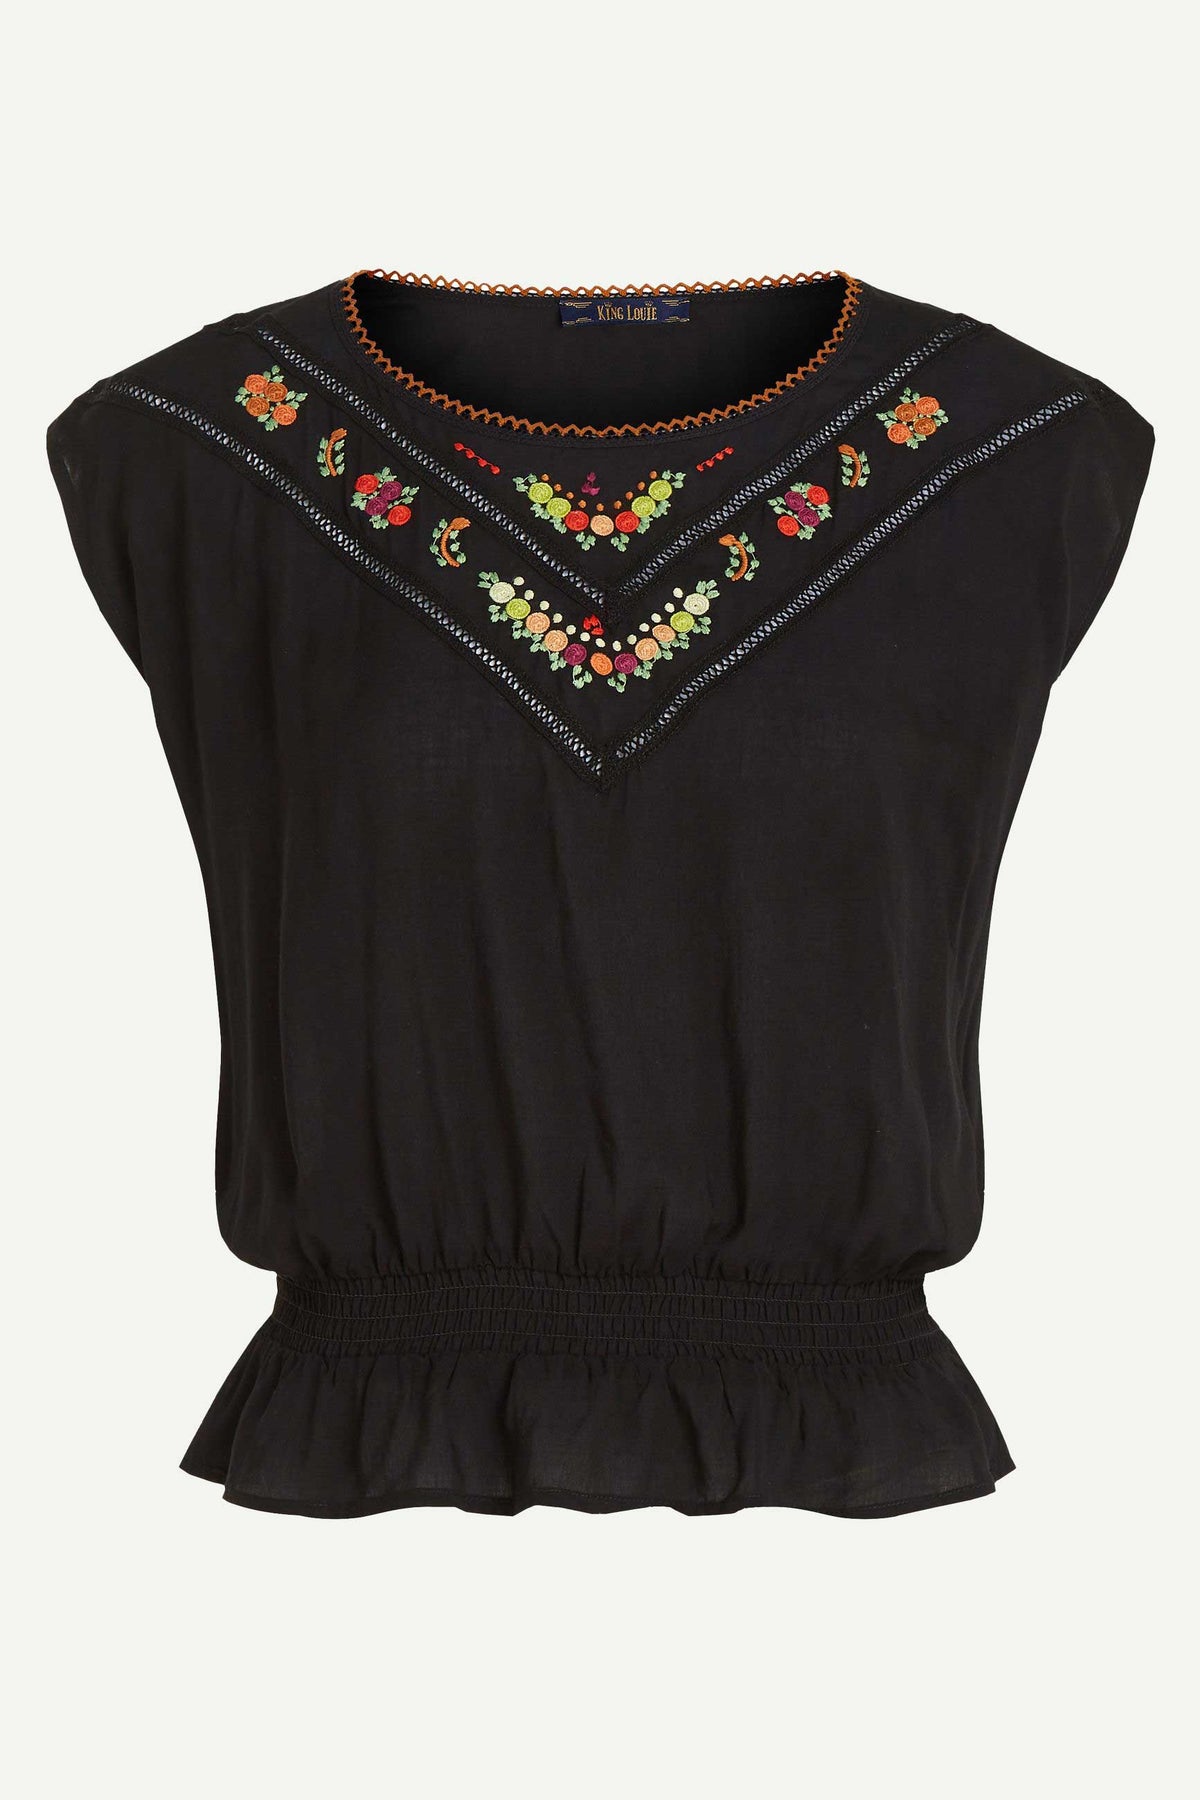 Top Selly Citrine Embroidery Black